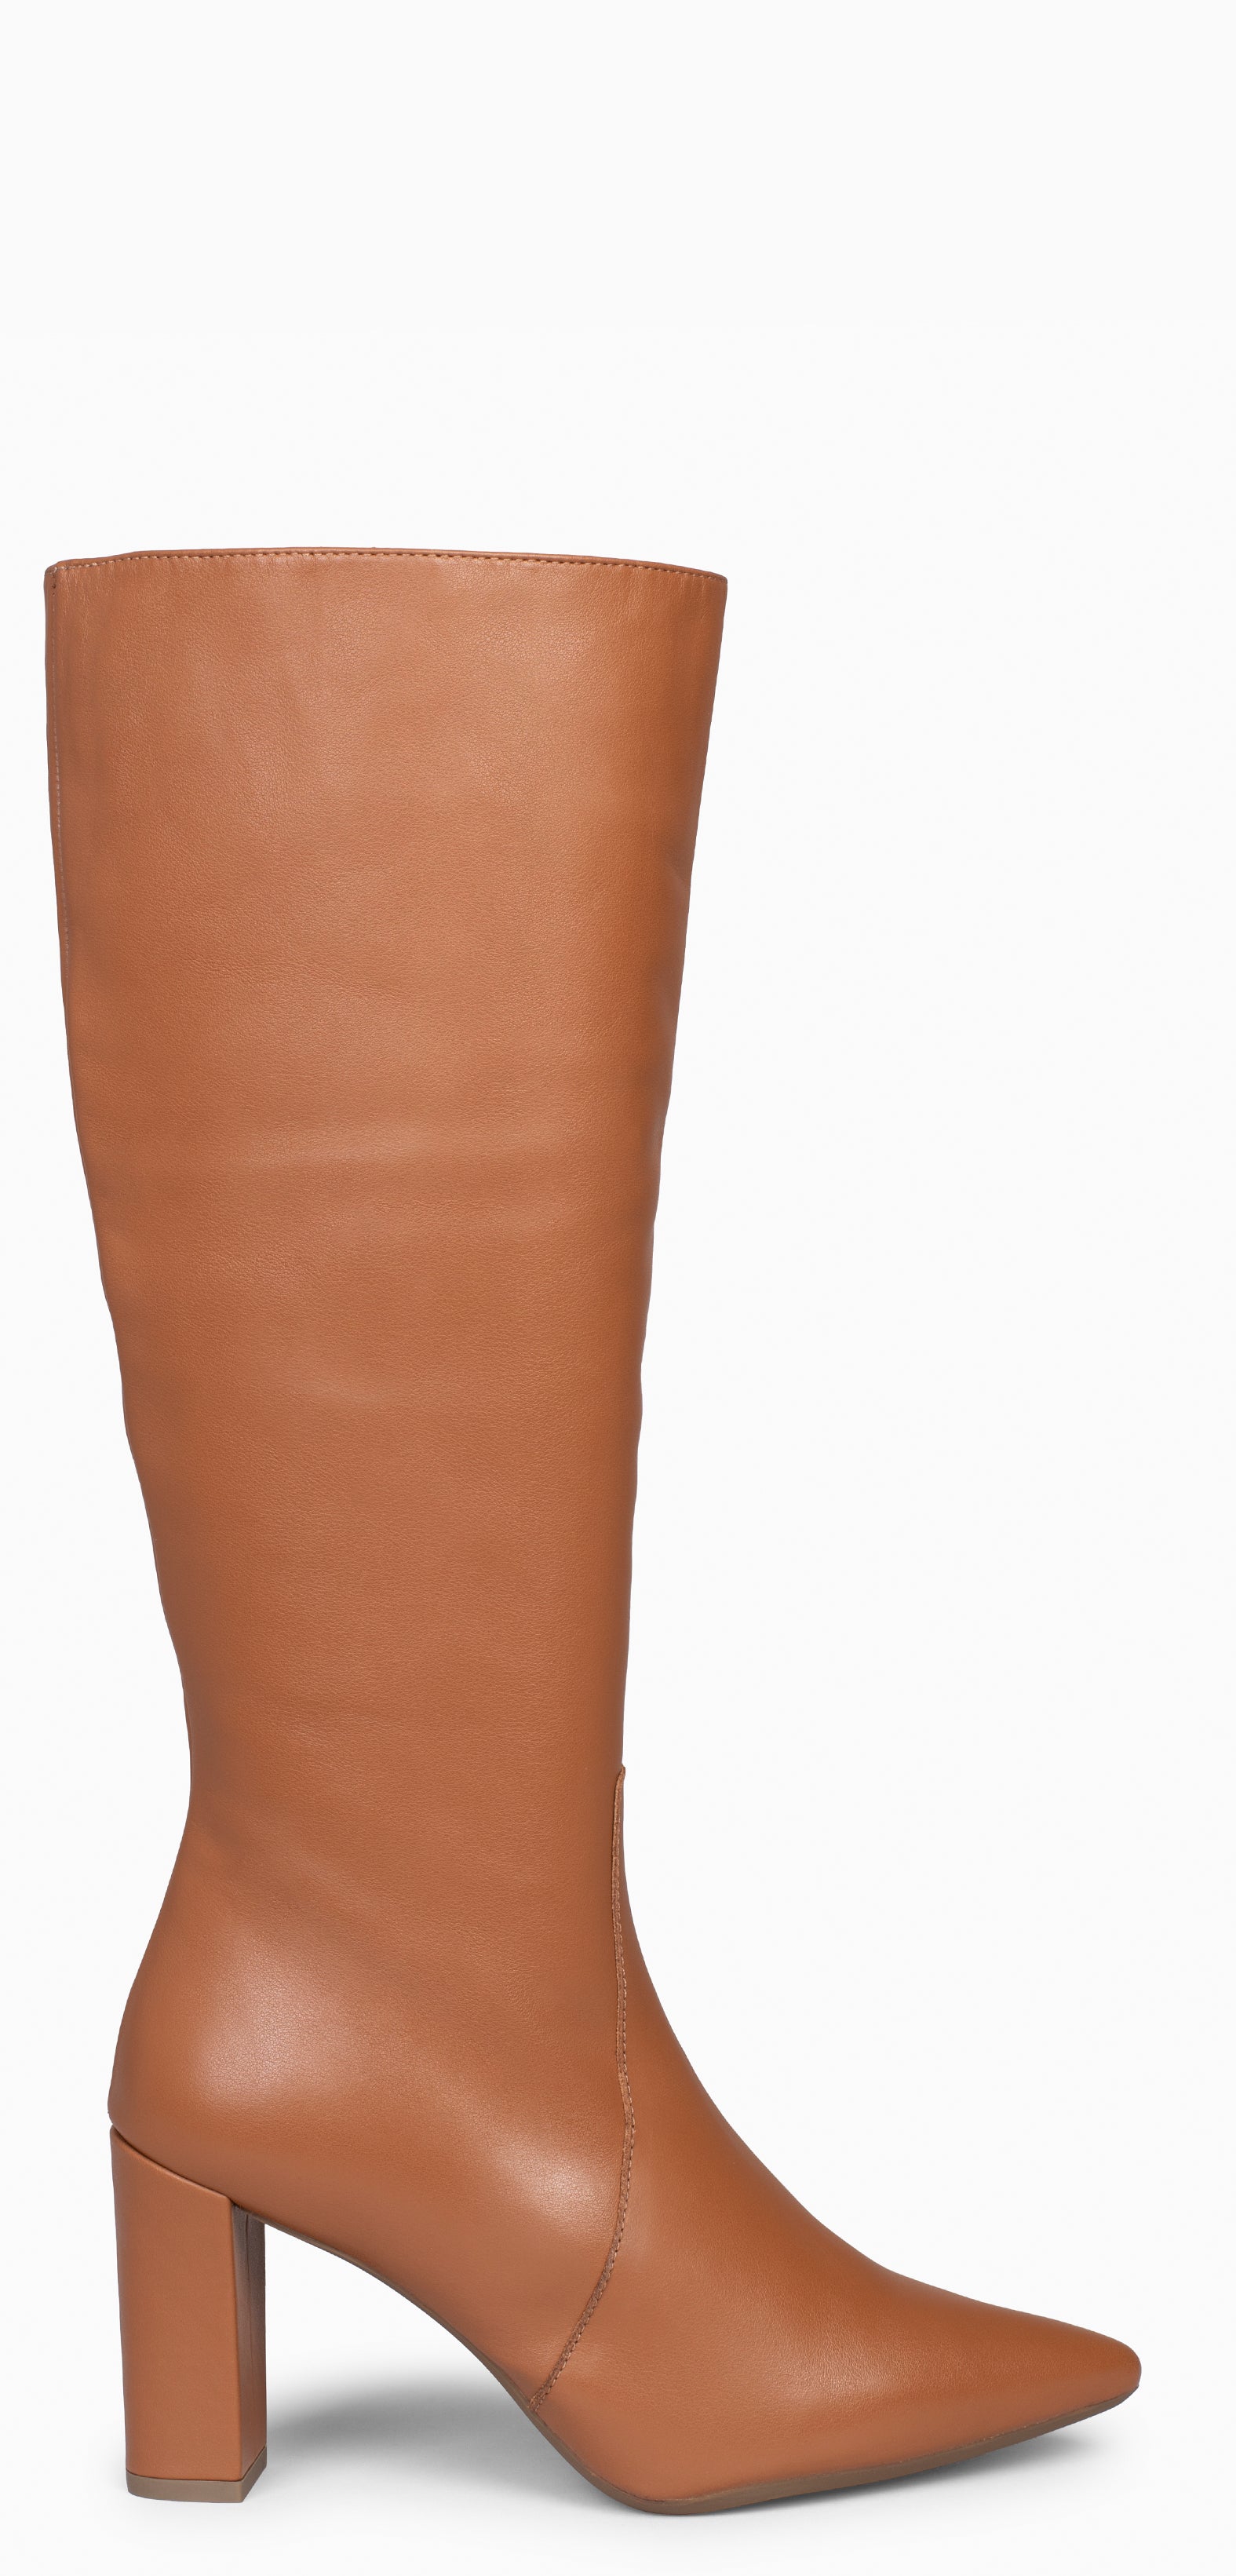 URBAN BOOT - CAMEL high boots with zipper nappa